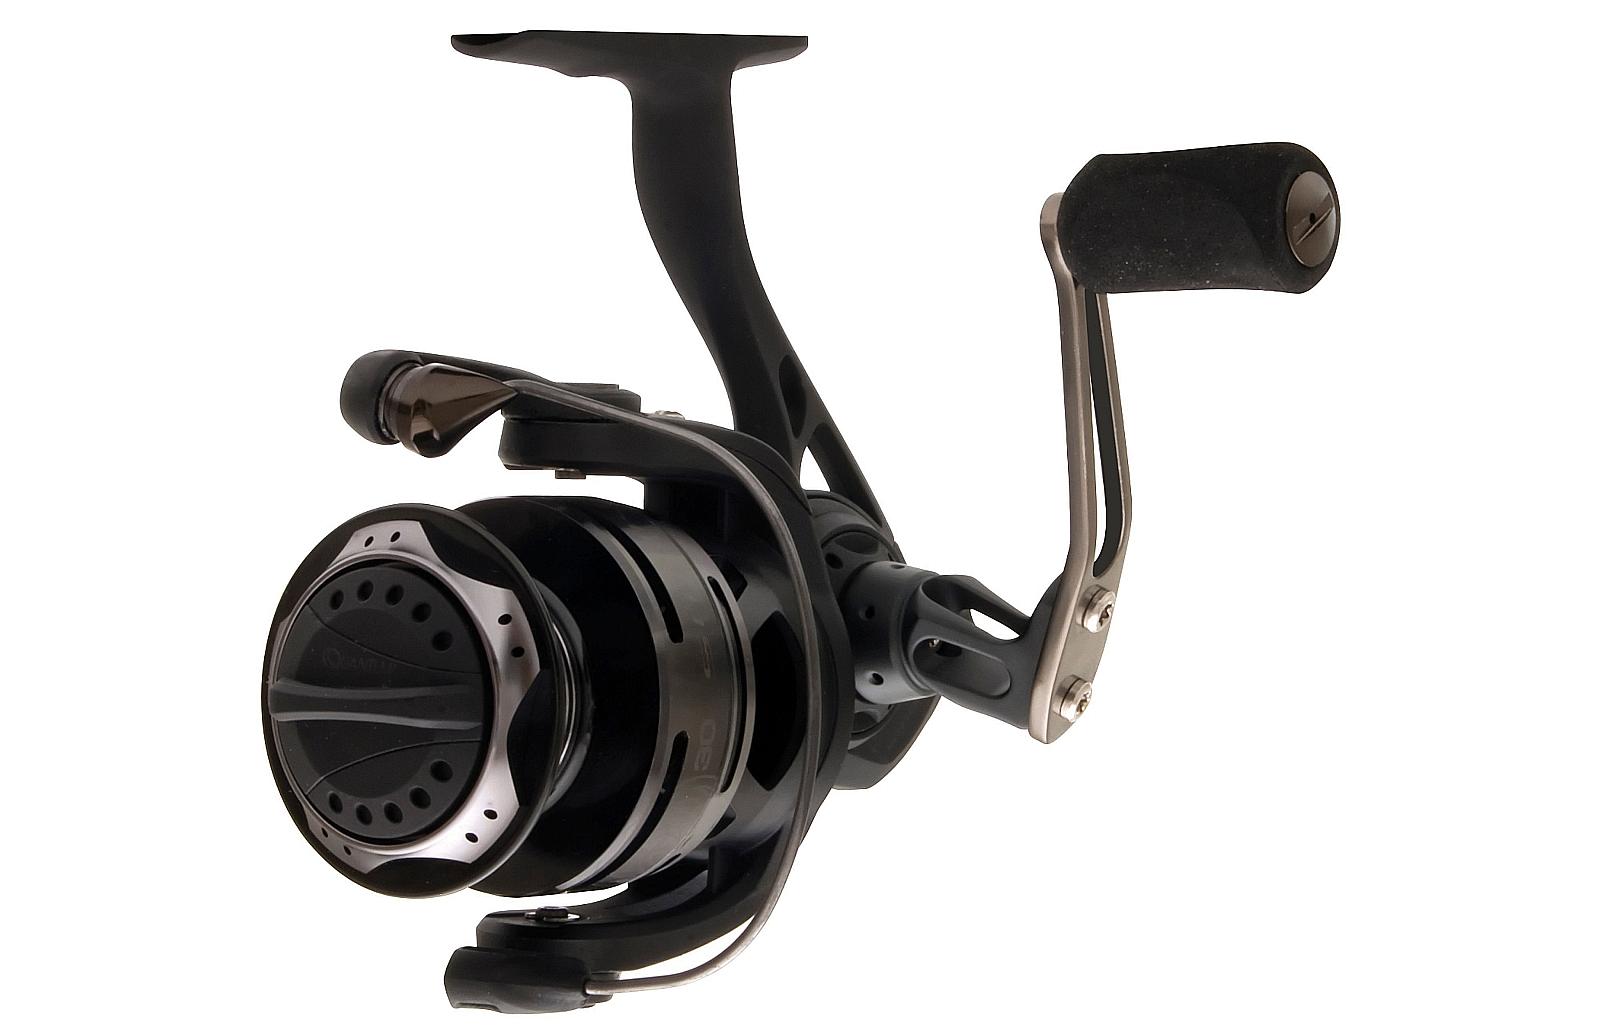 Quantum Fire Spinning Reel